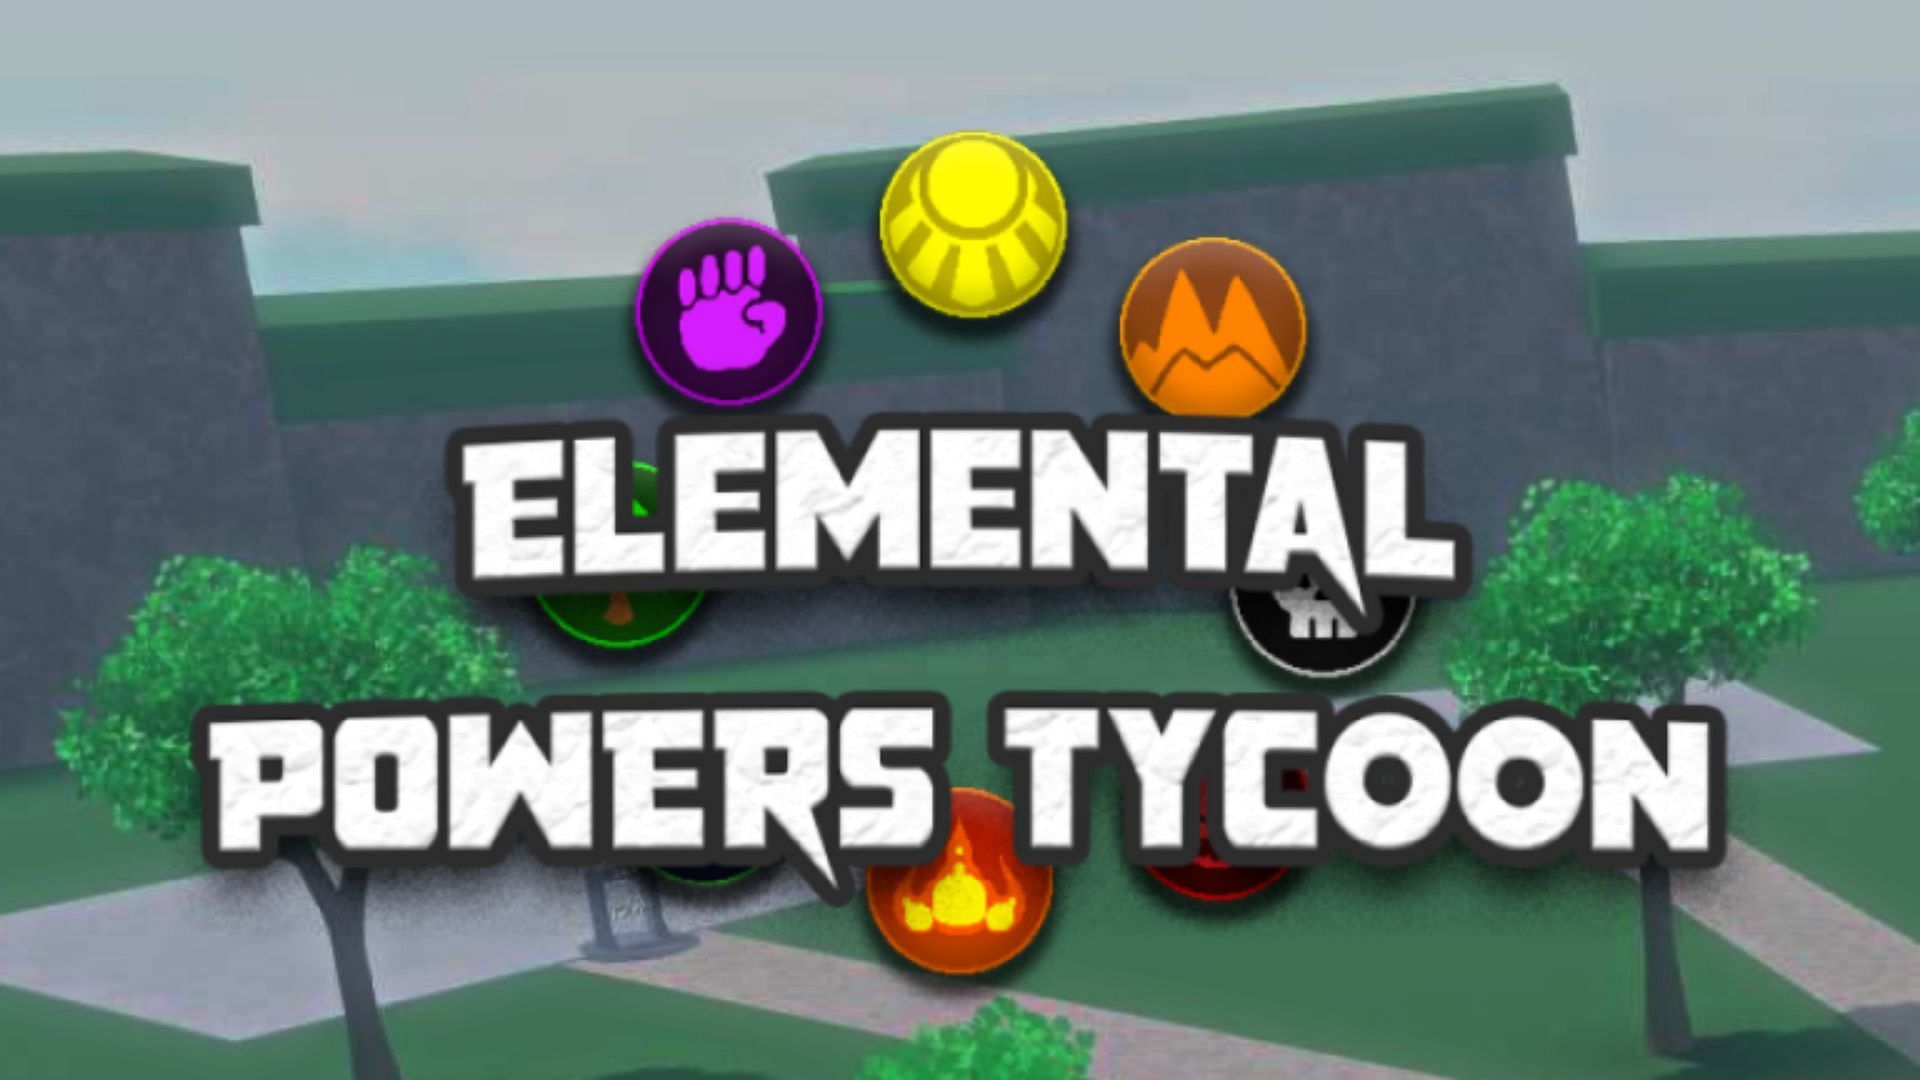 What is Elemental Powers Tycoon all about? (Image via Roblox)